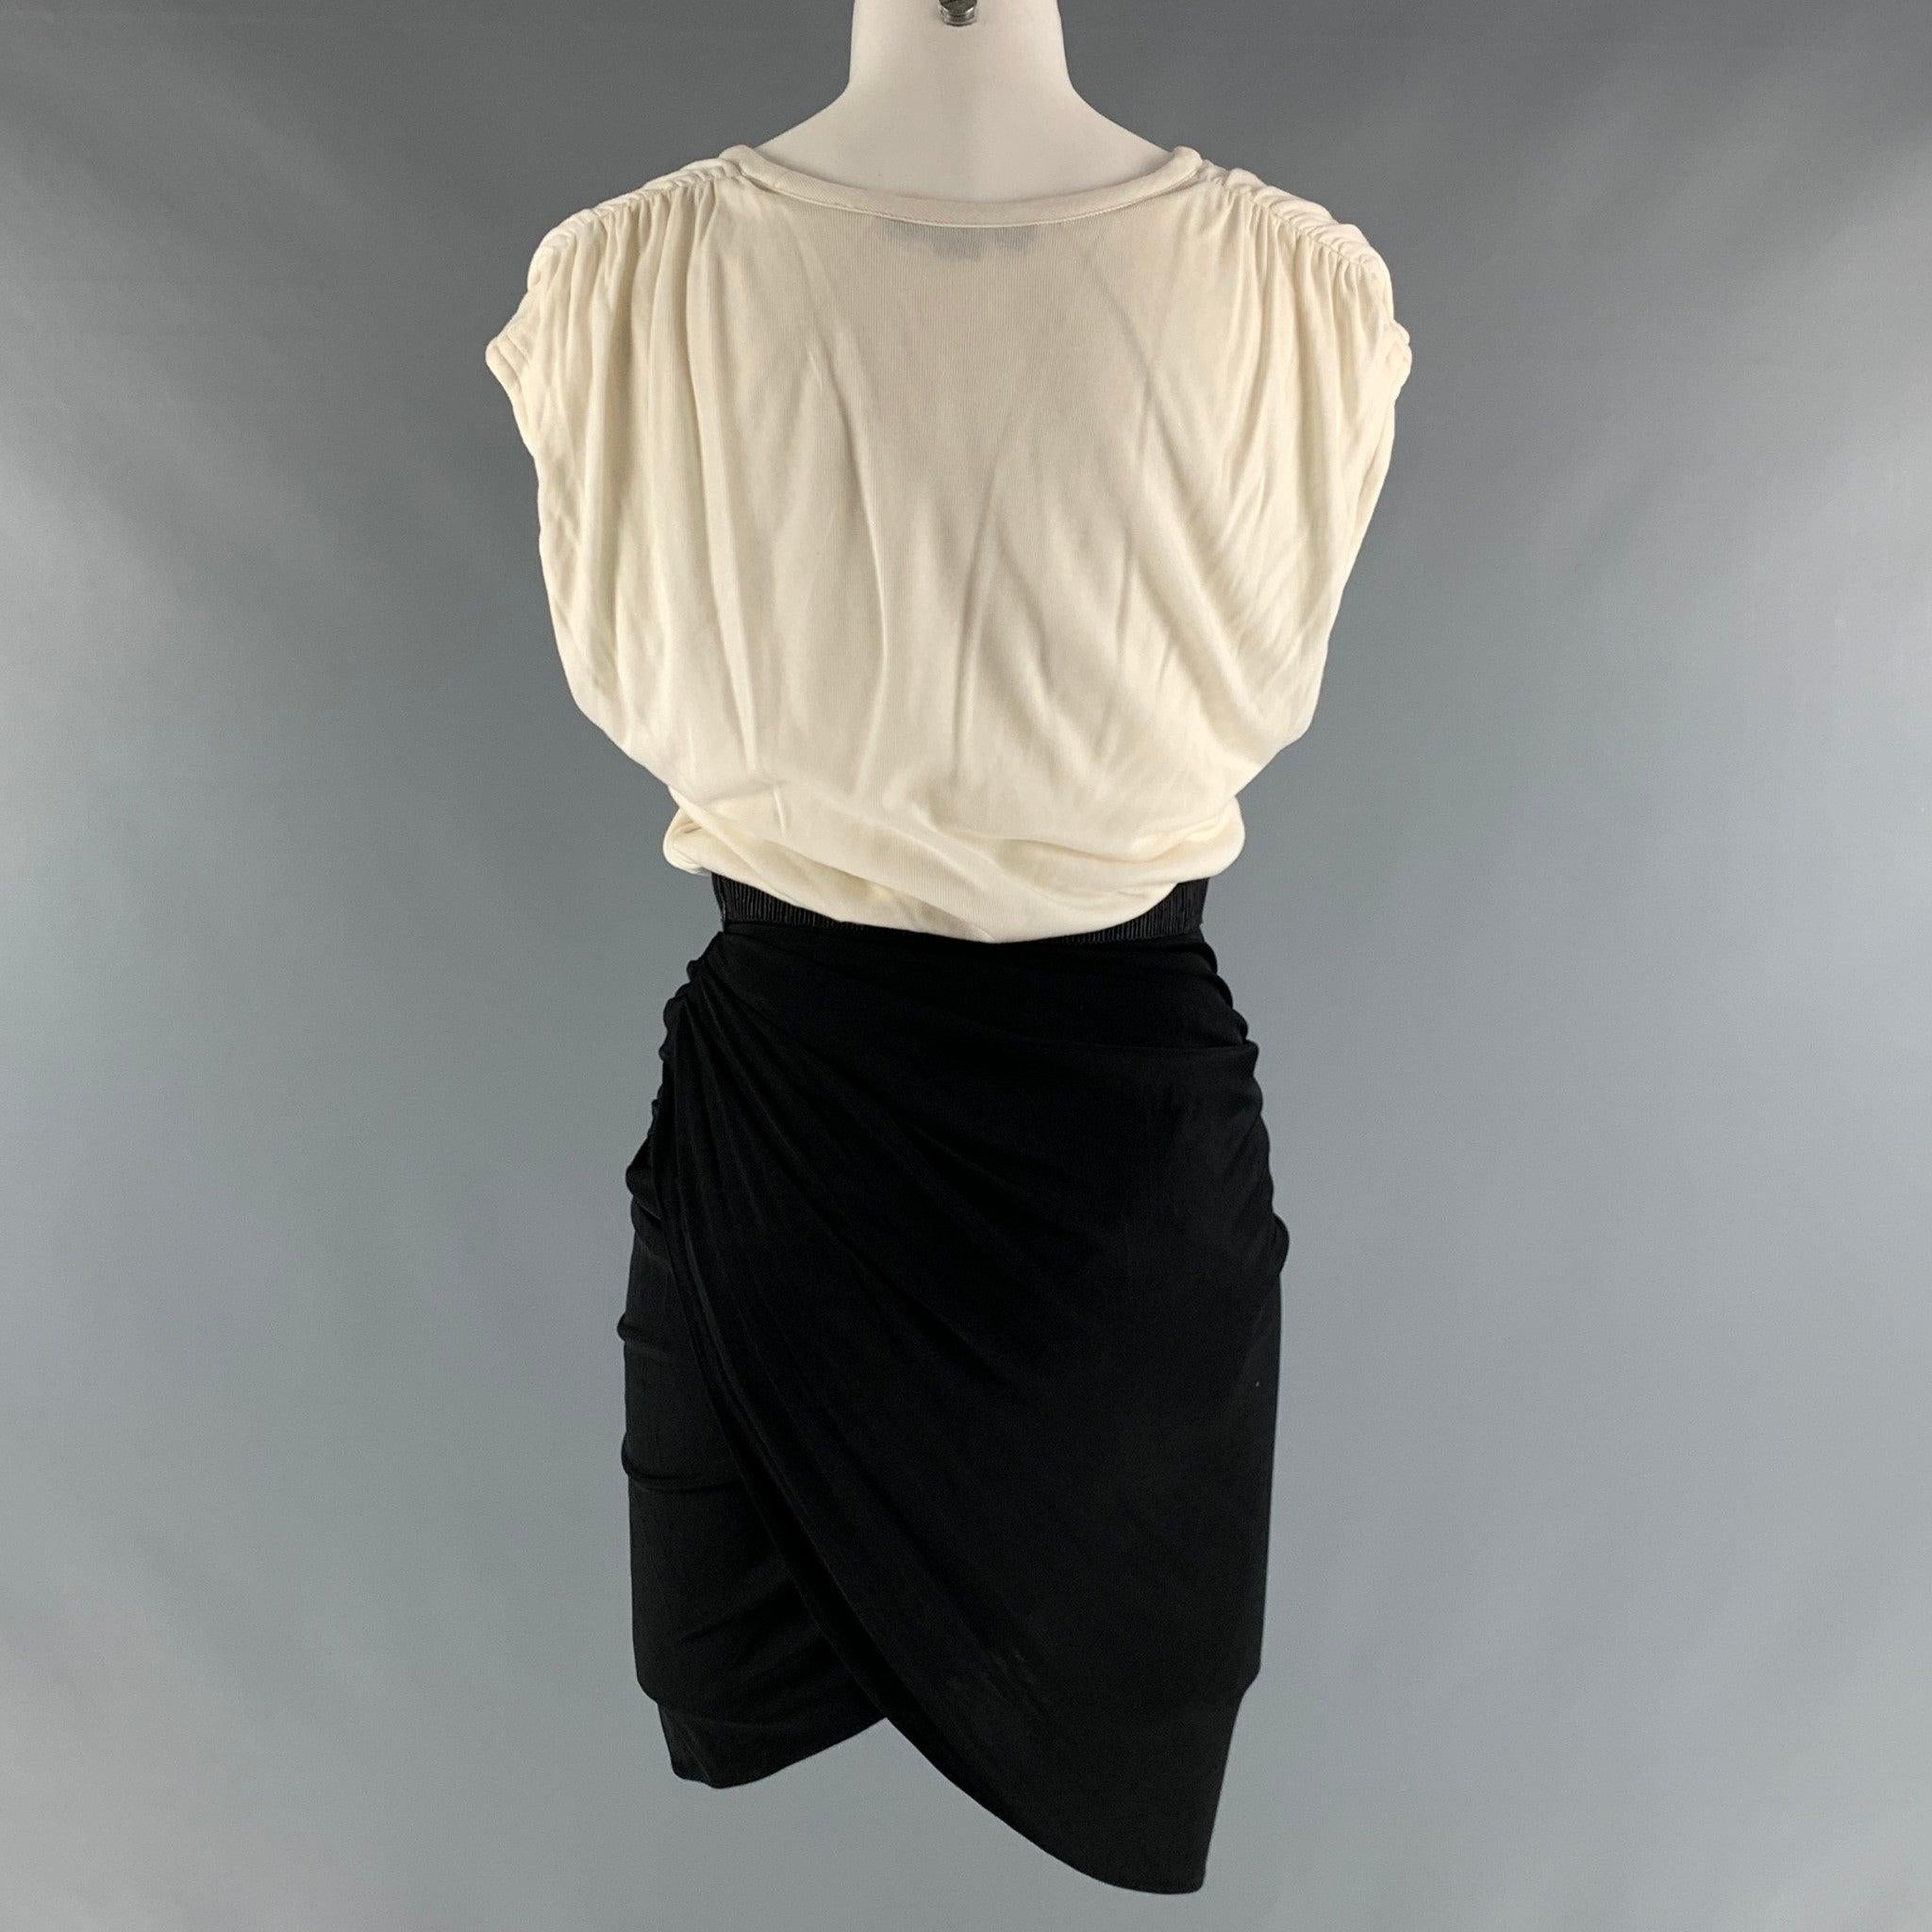 ALEXANDER WANG Size 4 White Black Sleeveless Dress In Good Condition For Sale In San Francisco, CA